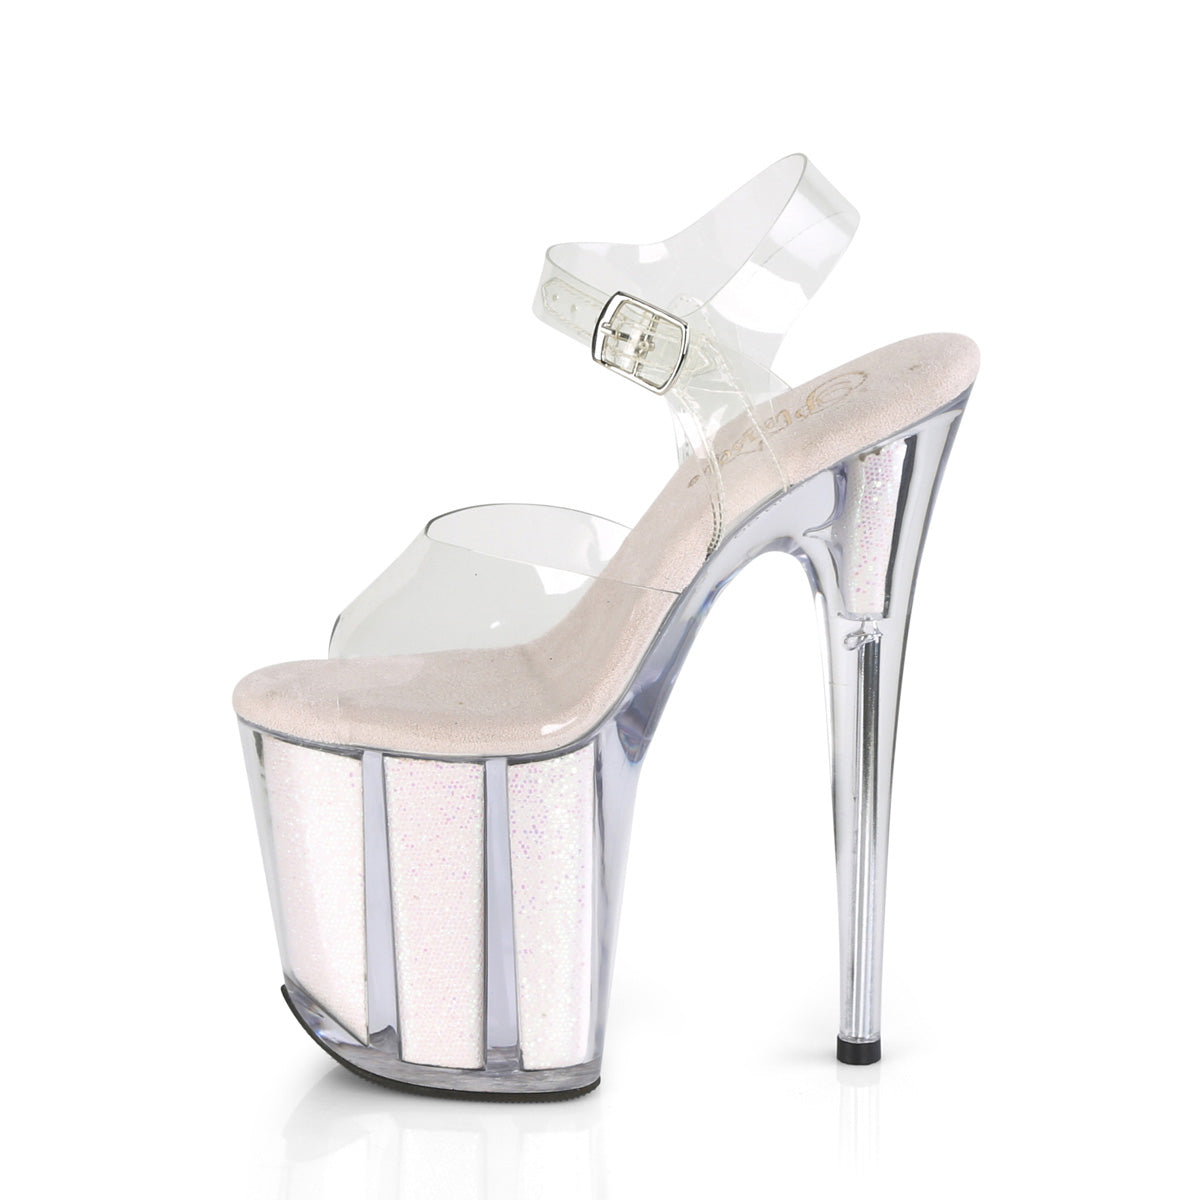 FLAMINGO-808G 8" Heel Clear Opal Glitter Inserts Sexy Shoes-Pleaser- Sexy Shoes Pole Dance Heels